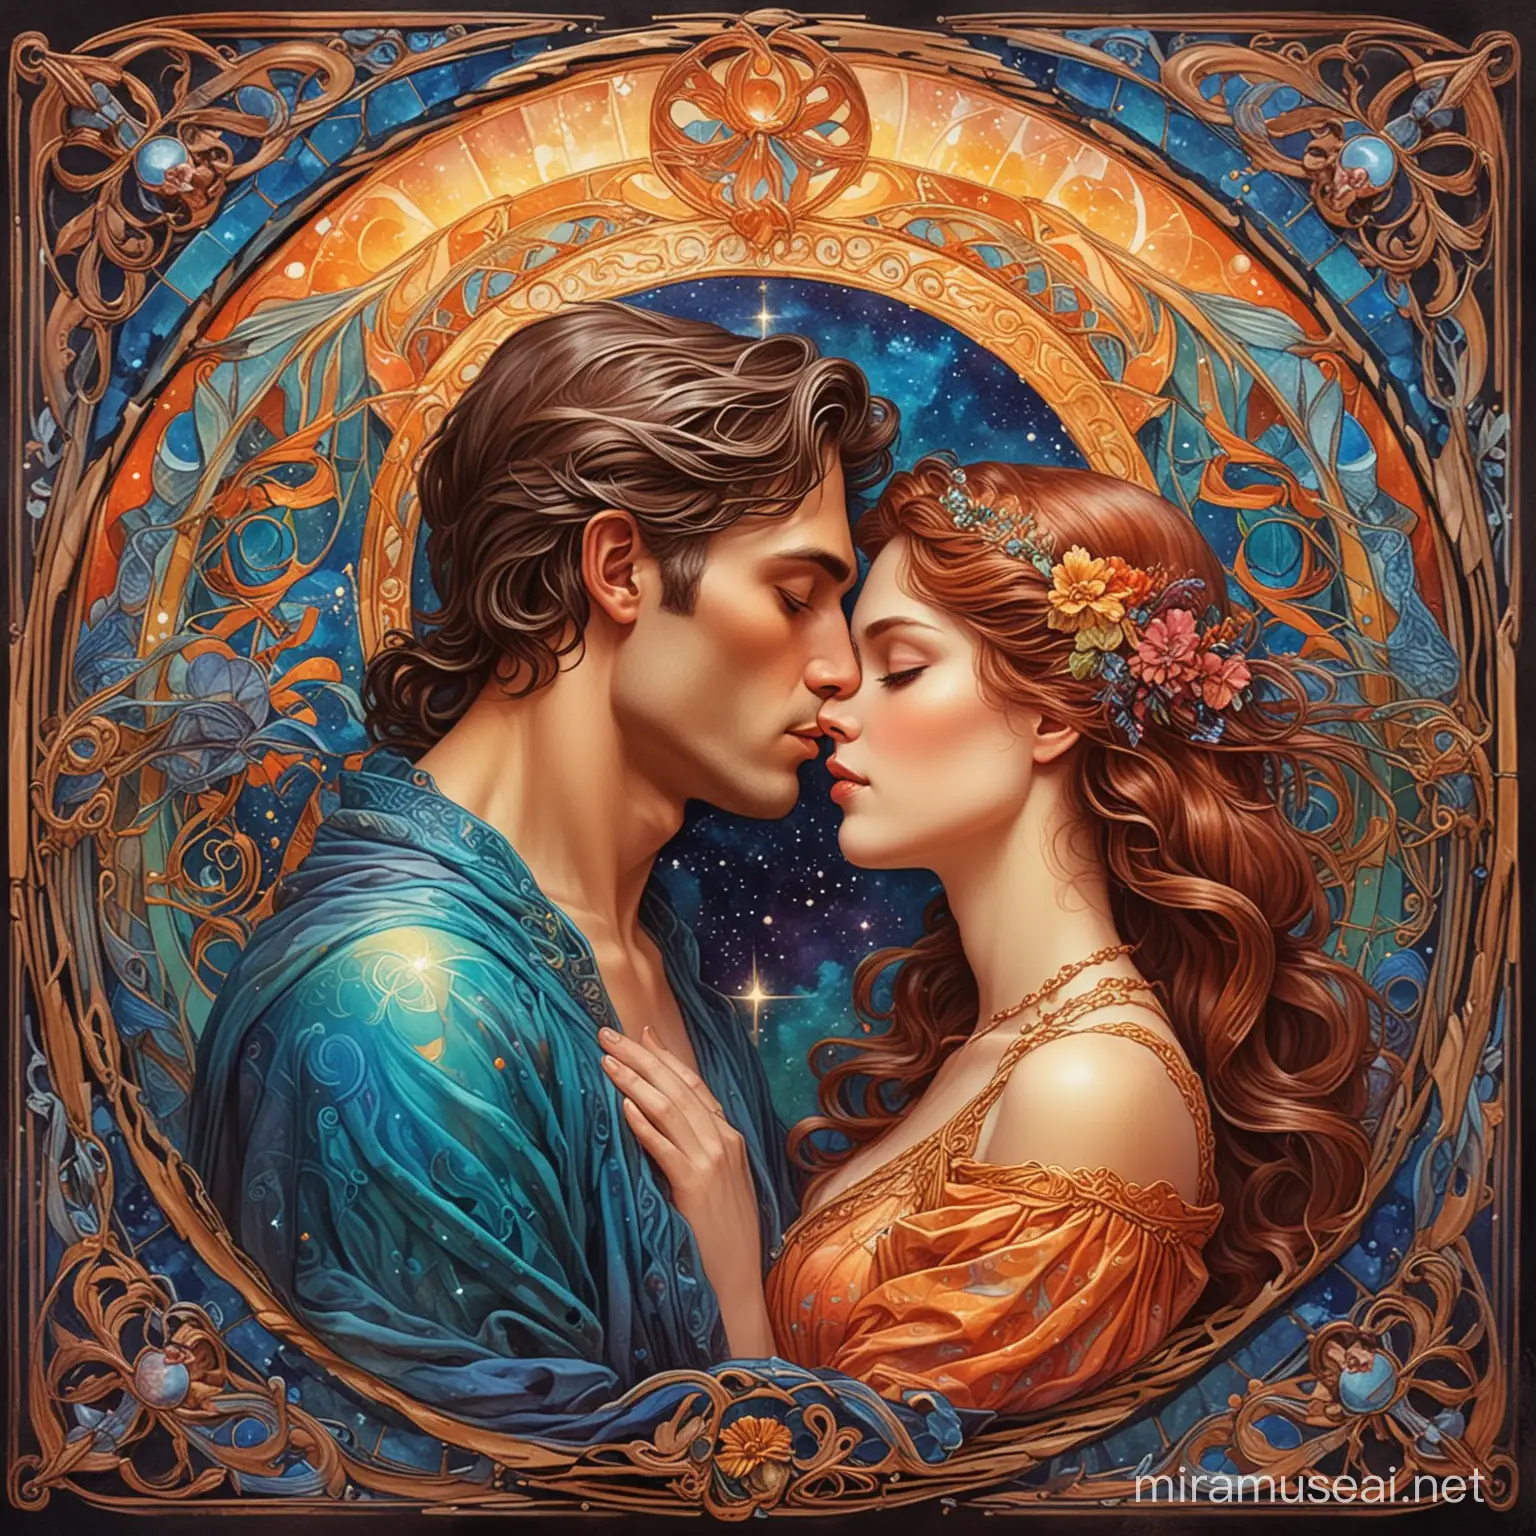 rekindled forbidden love between man and woman, art nouveau style, ancient sacred prophesy, colorful mystical worlds